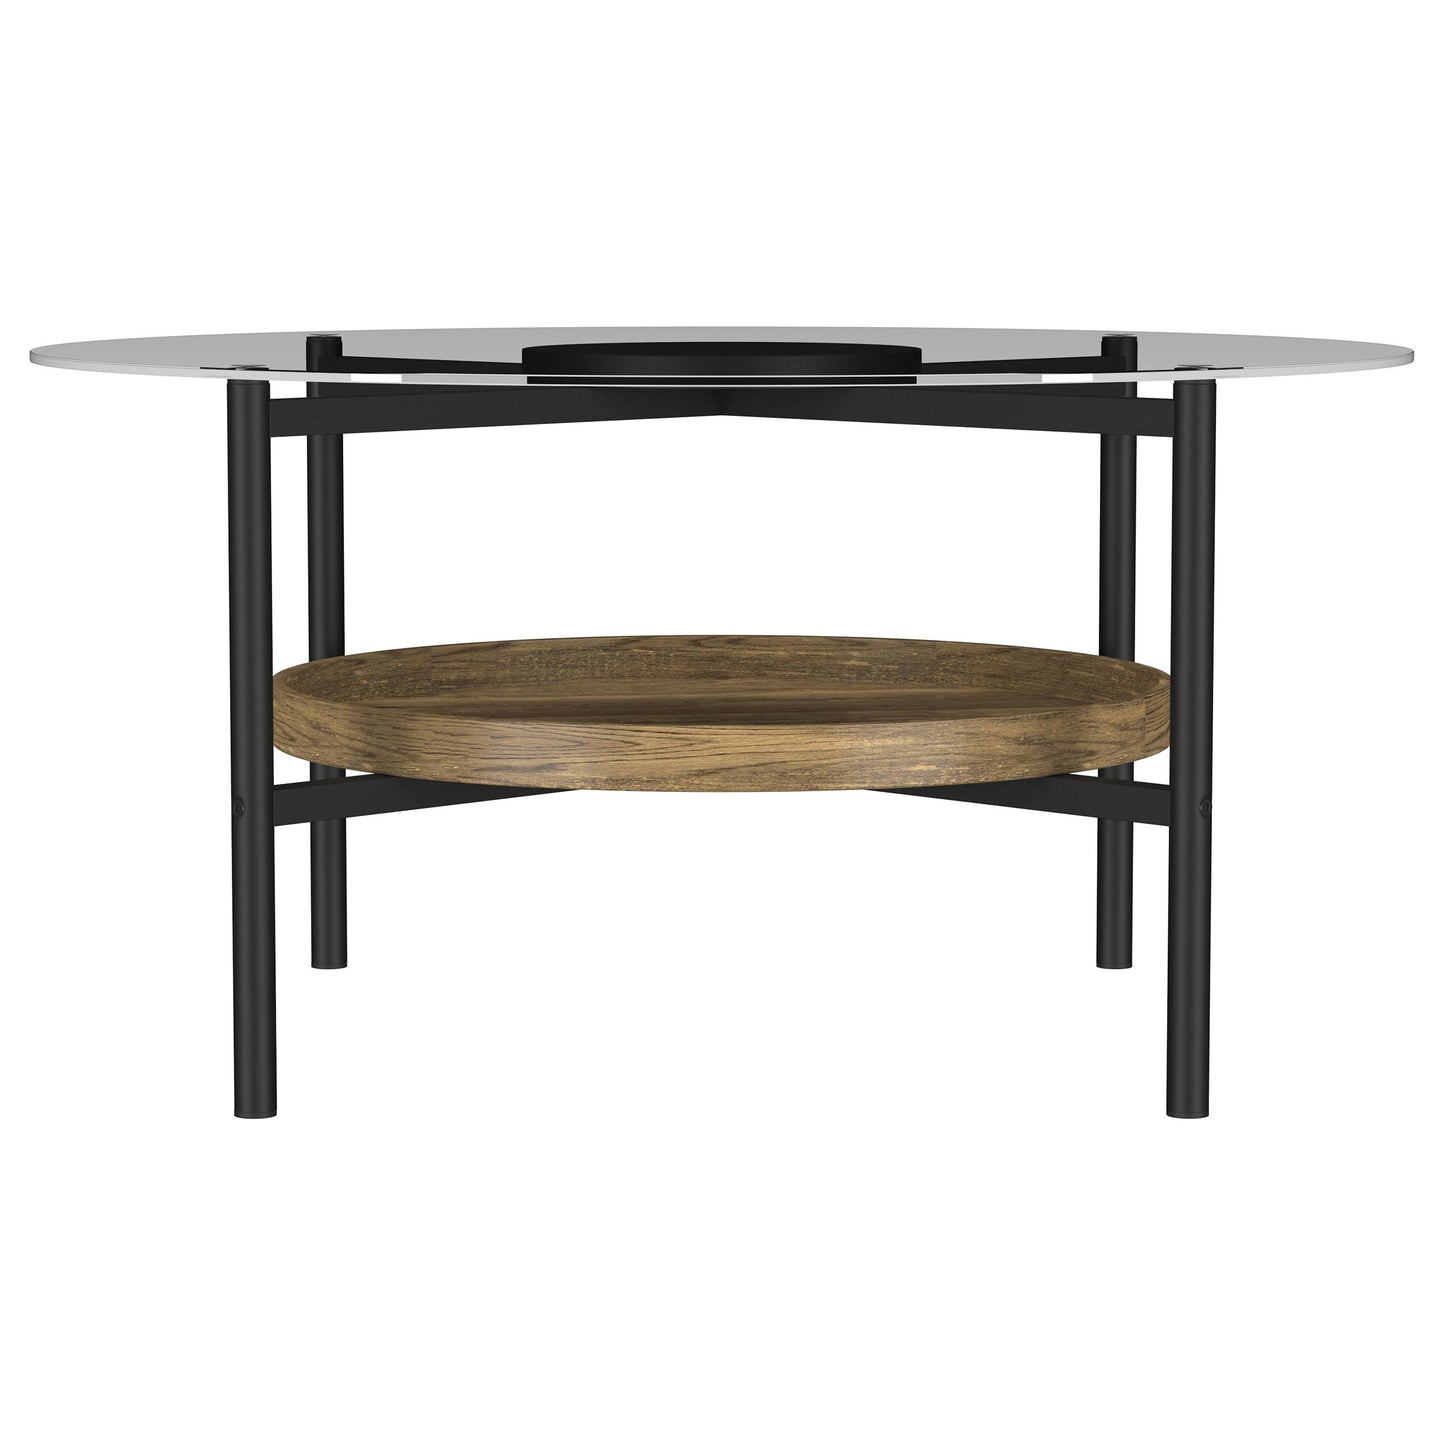 Delfin Round Glass Top Coffee Table with Shelf Black and Brown